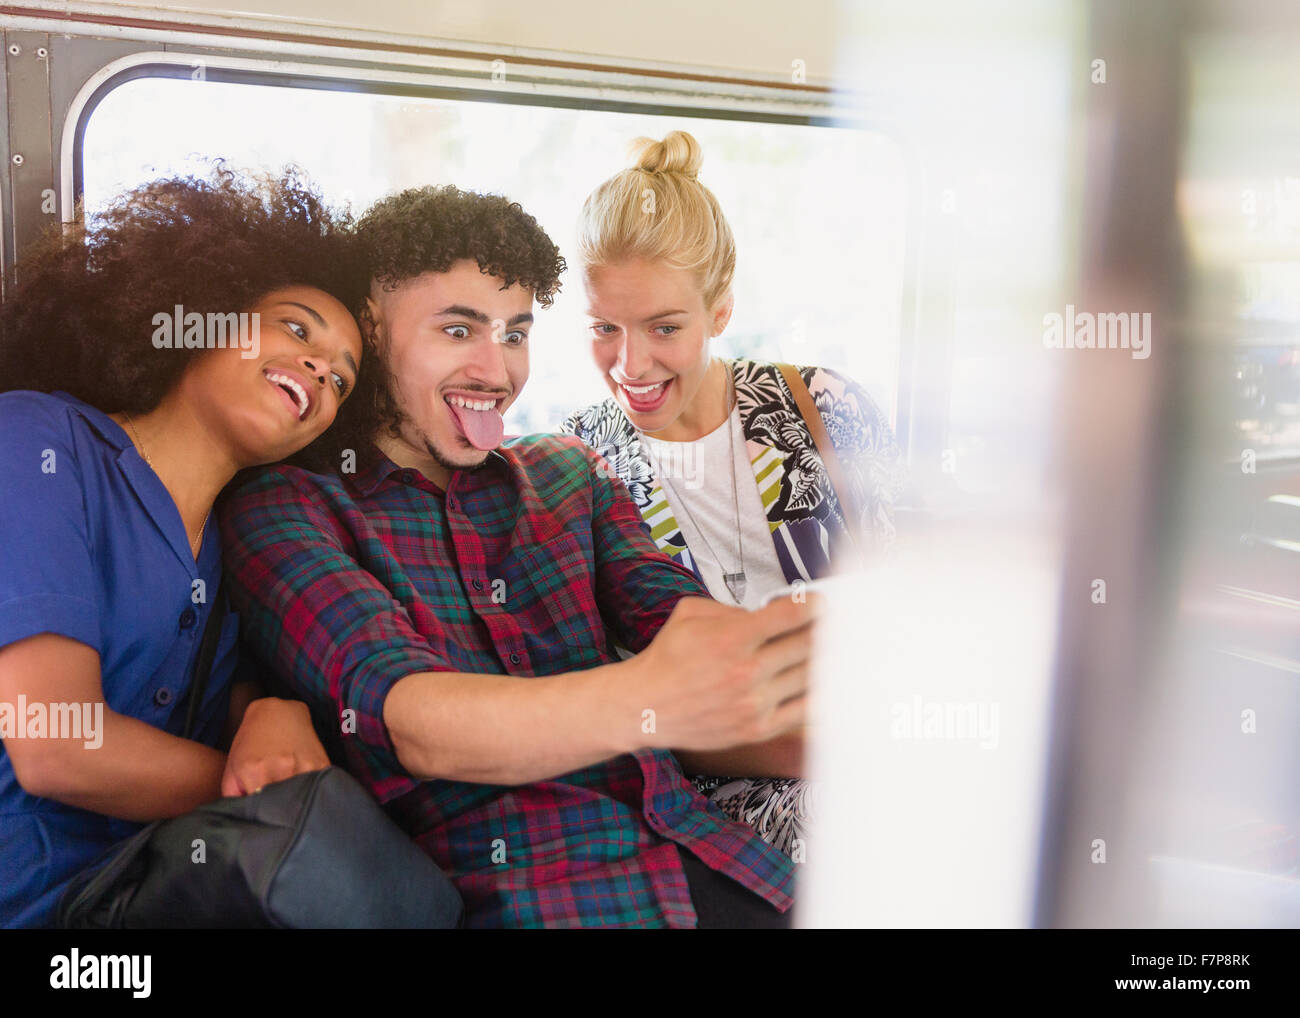 Playful friends taking selfie making faces on bus Stock Photo